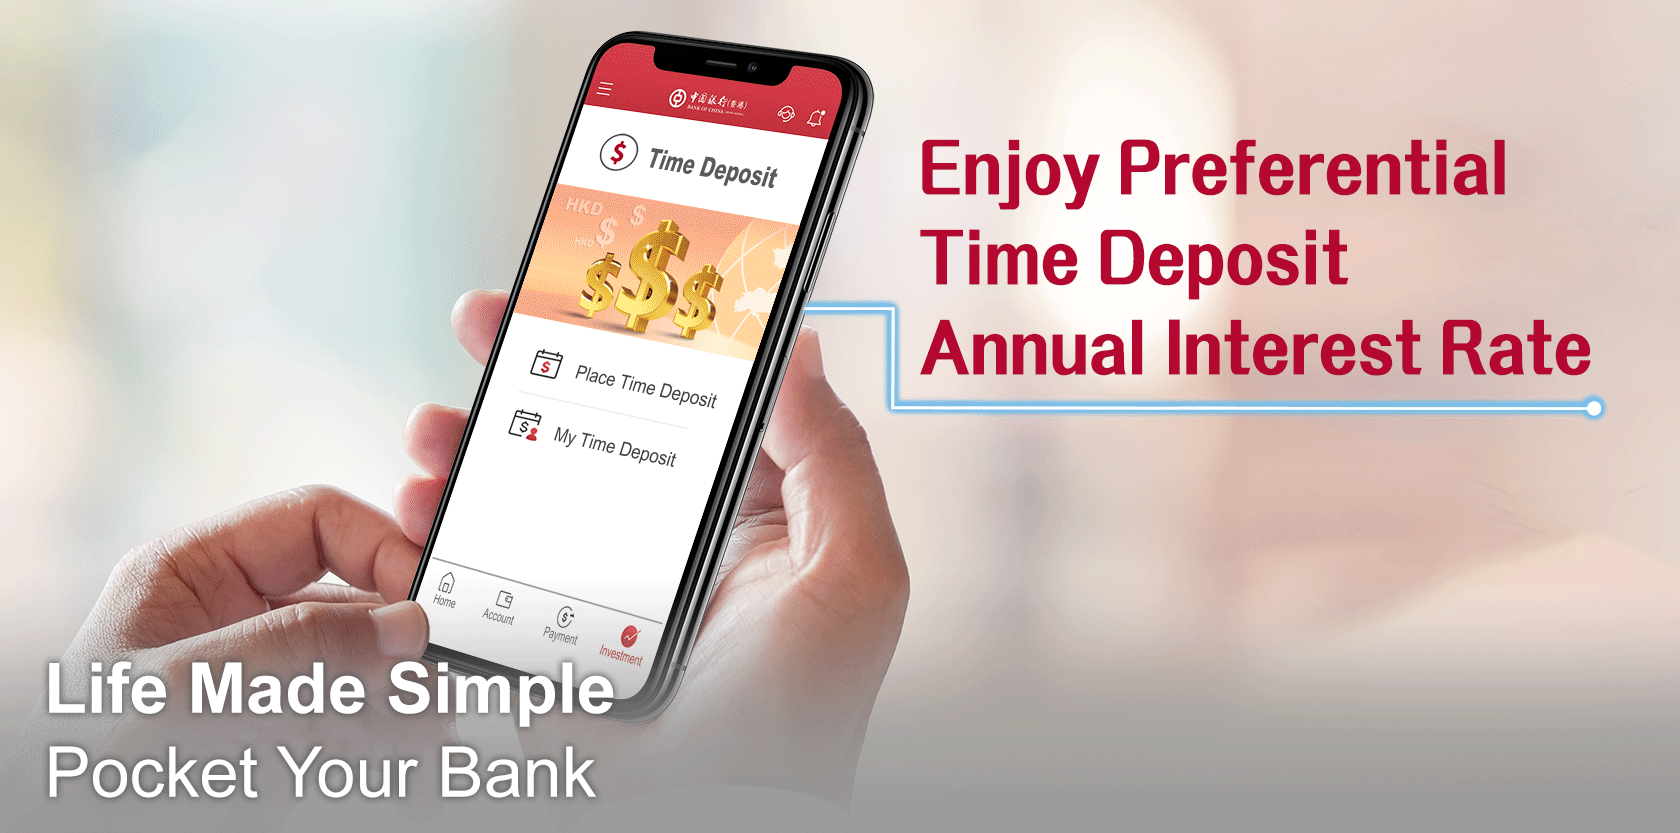 Life Made Simple Pocket Your Bank
e-Channel New Fund Preferential Time Deposit